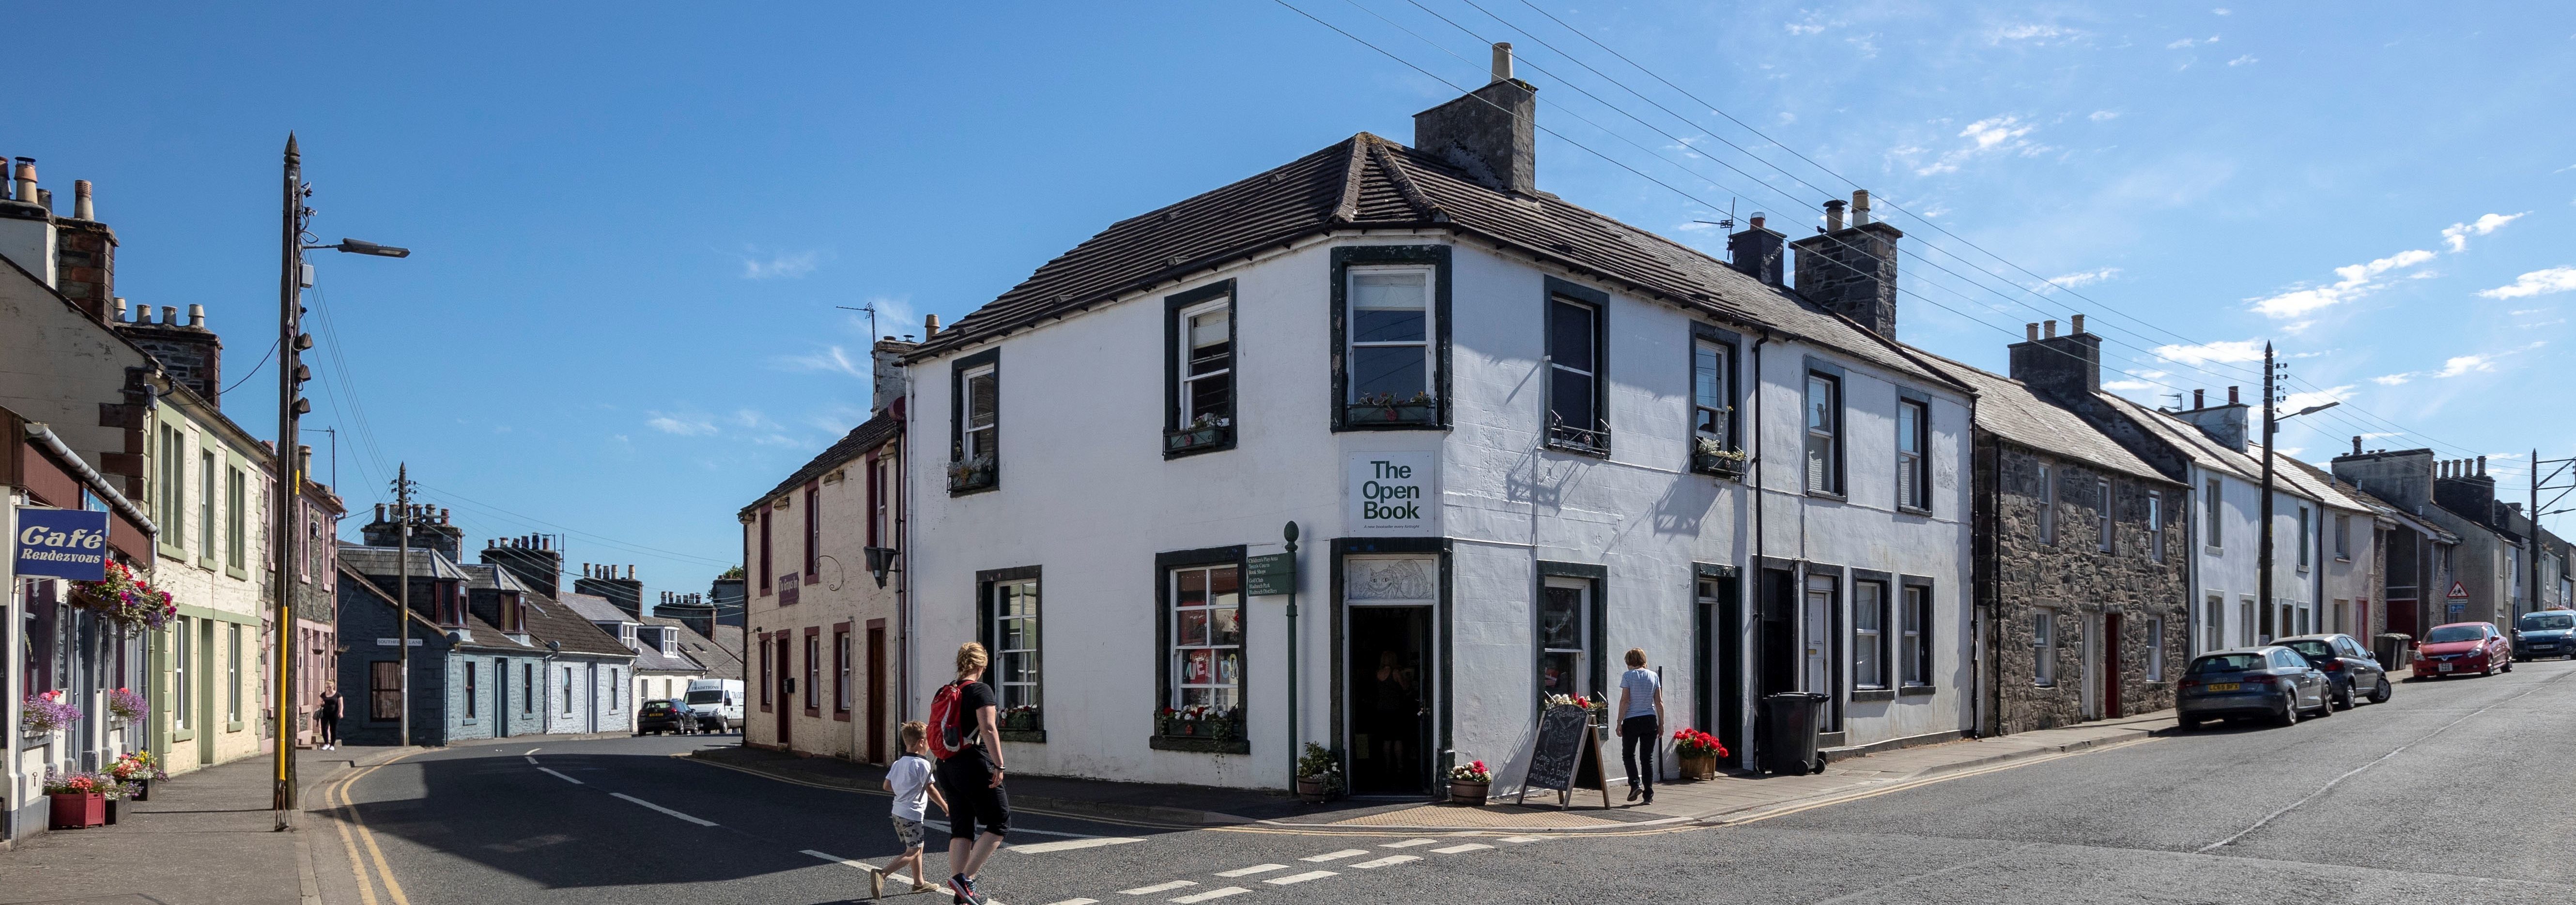 Corner view of the Open Book Bookshop in Wigtown. An adult and child are crossing the road, cars parked in the street, a telegraph pole on the left.